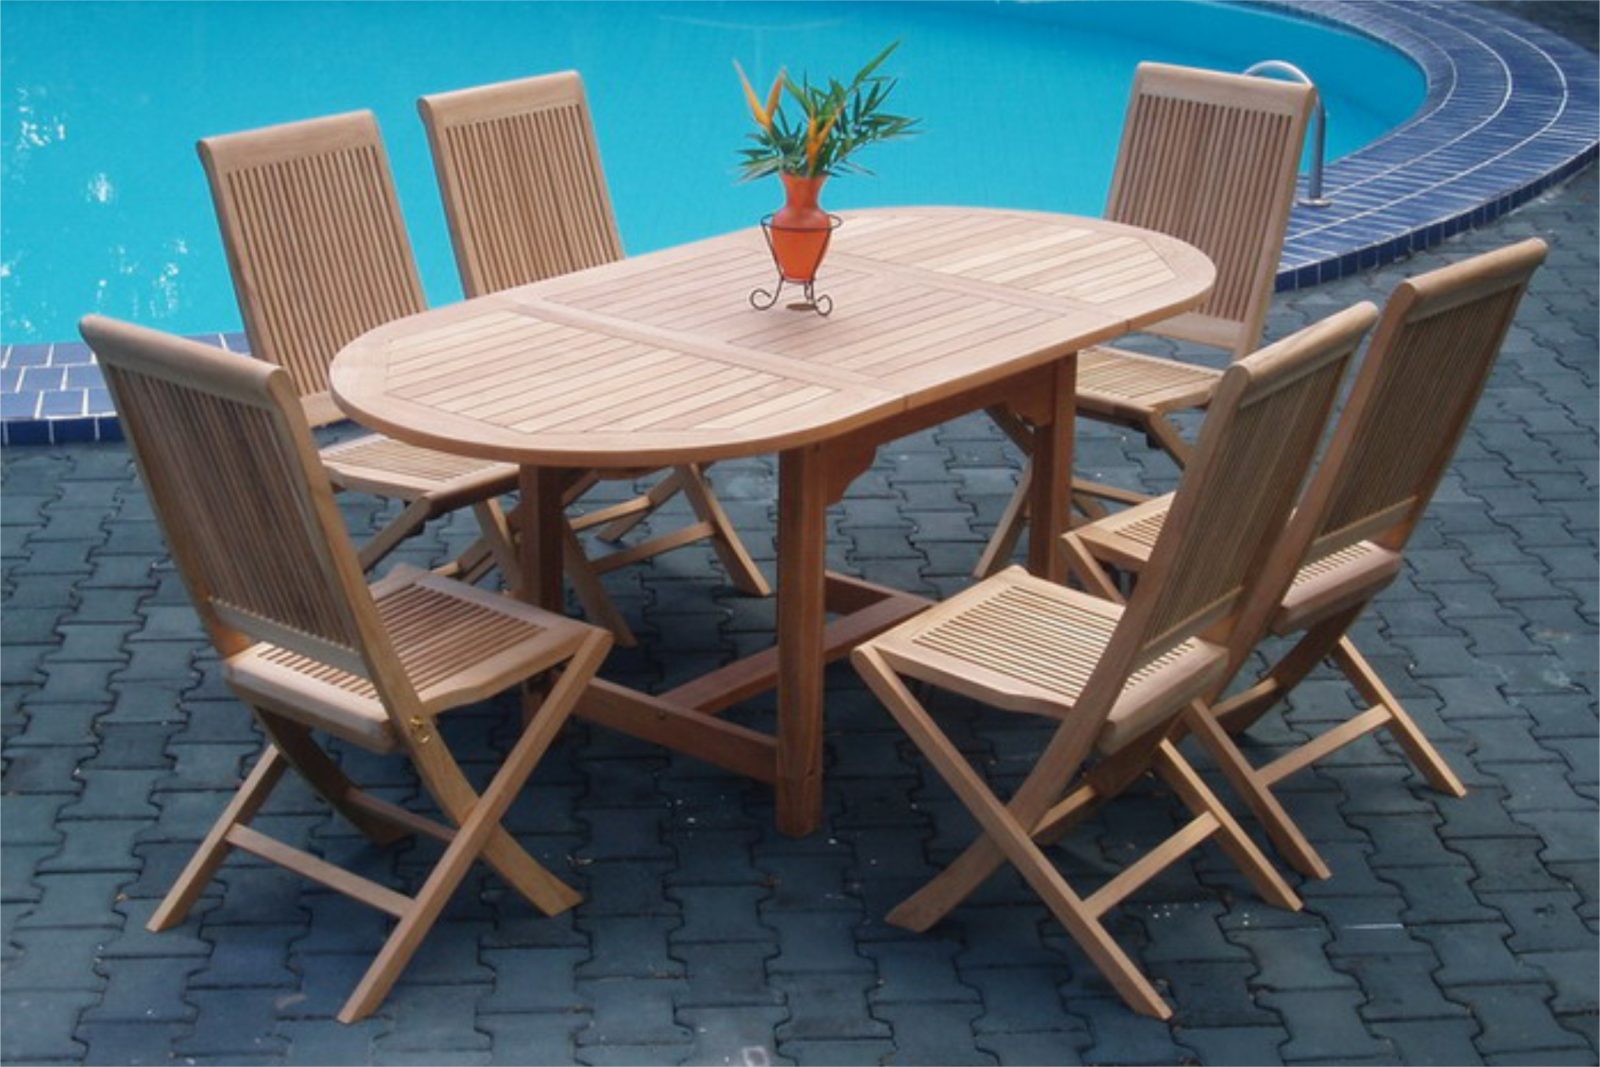 5 Easy Steps To Maintain Your Teak Furniture: DIY Tips